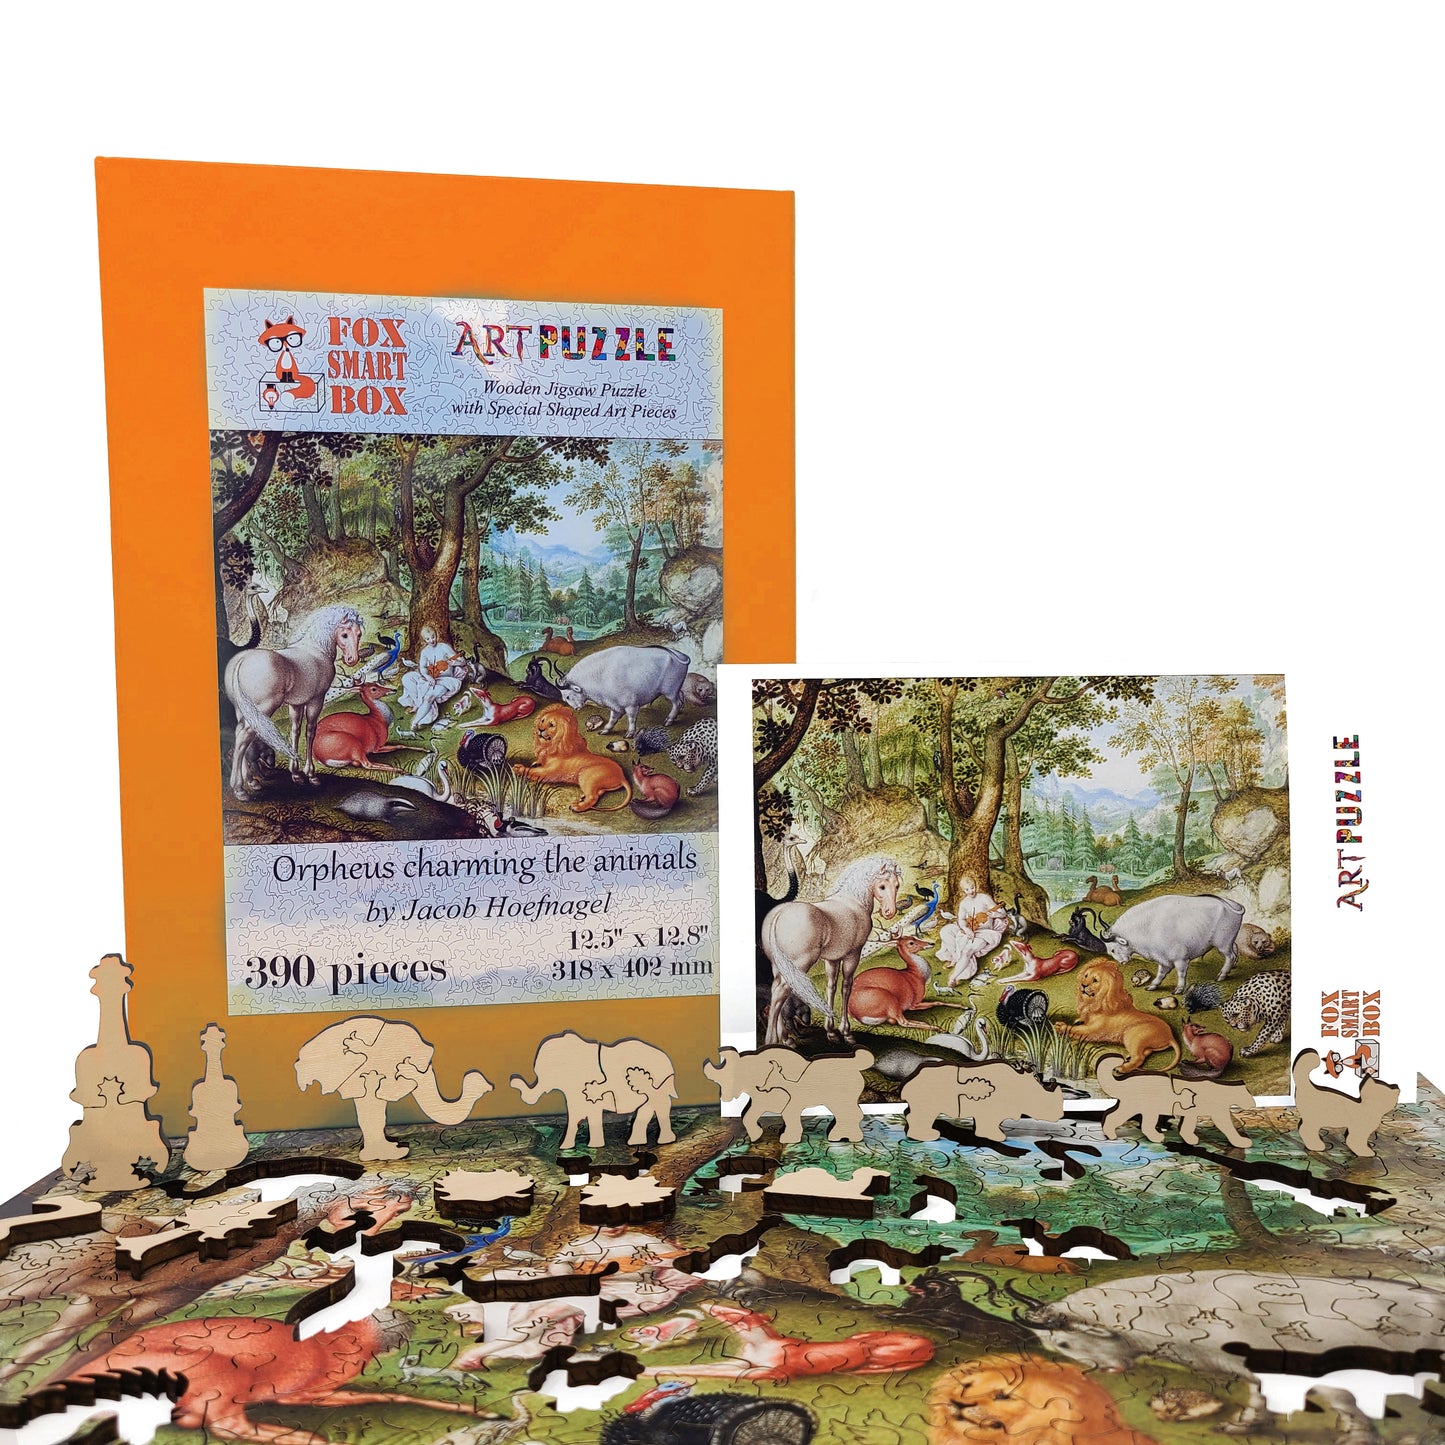 Wooden Jigsaw Puzzle with Uniquely Shaped Pieces for Adults - 390 Pieces - Orpheus charming the animals